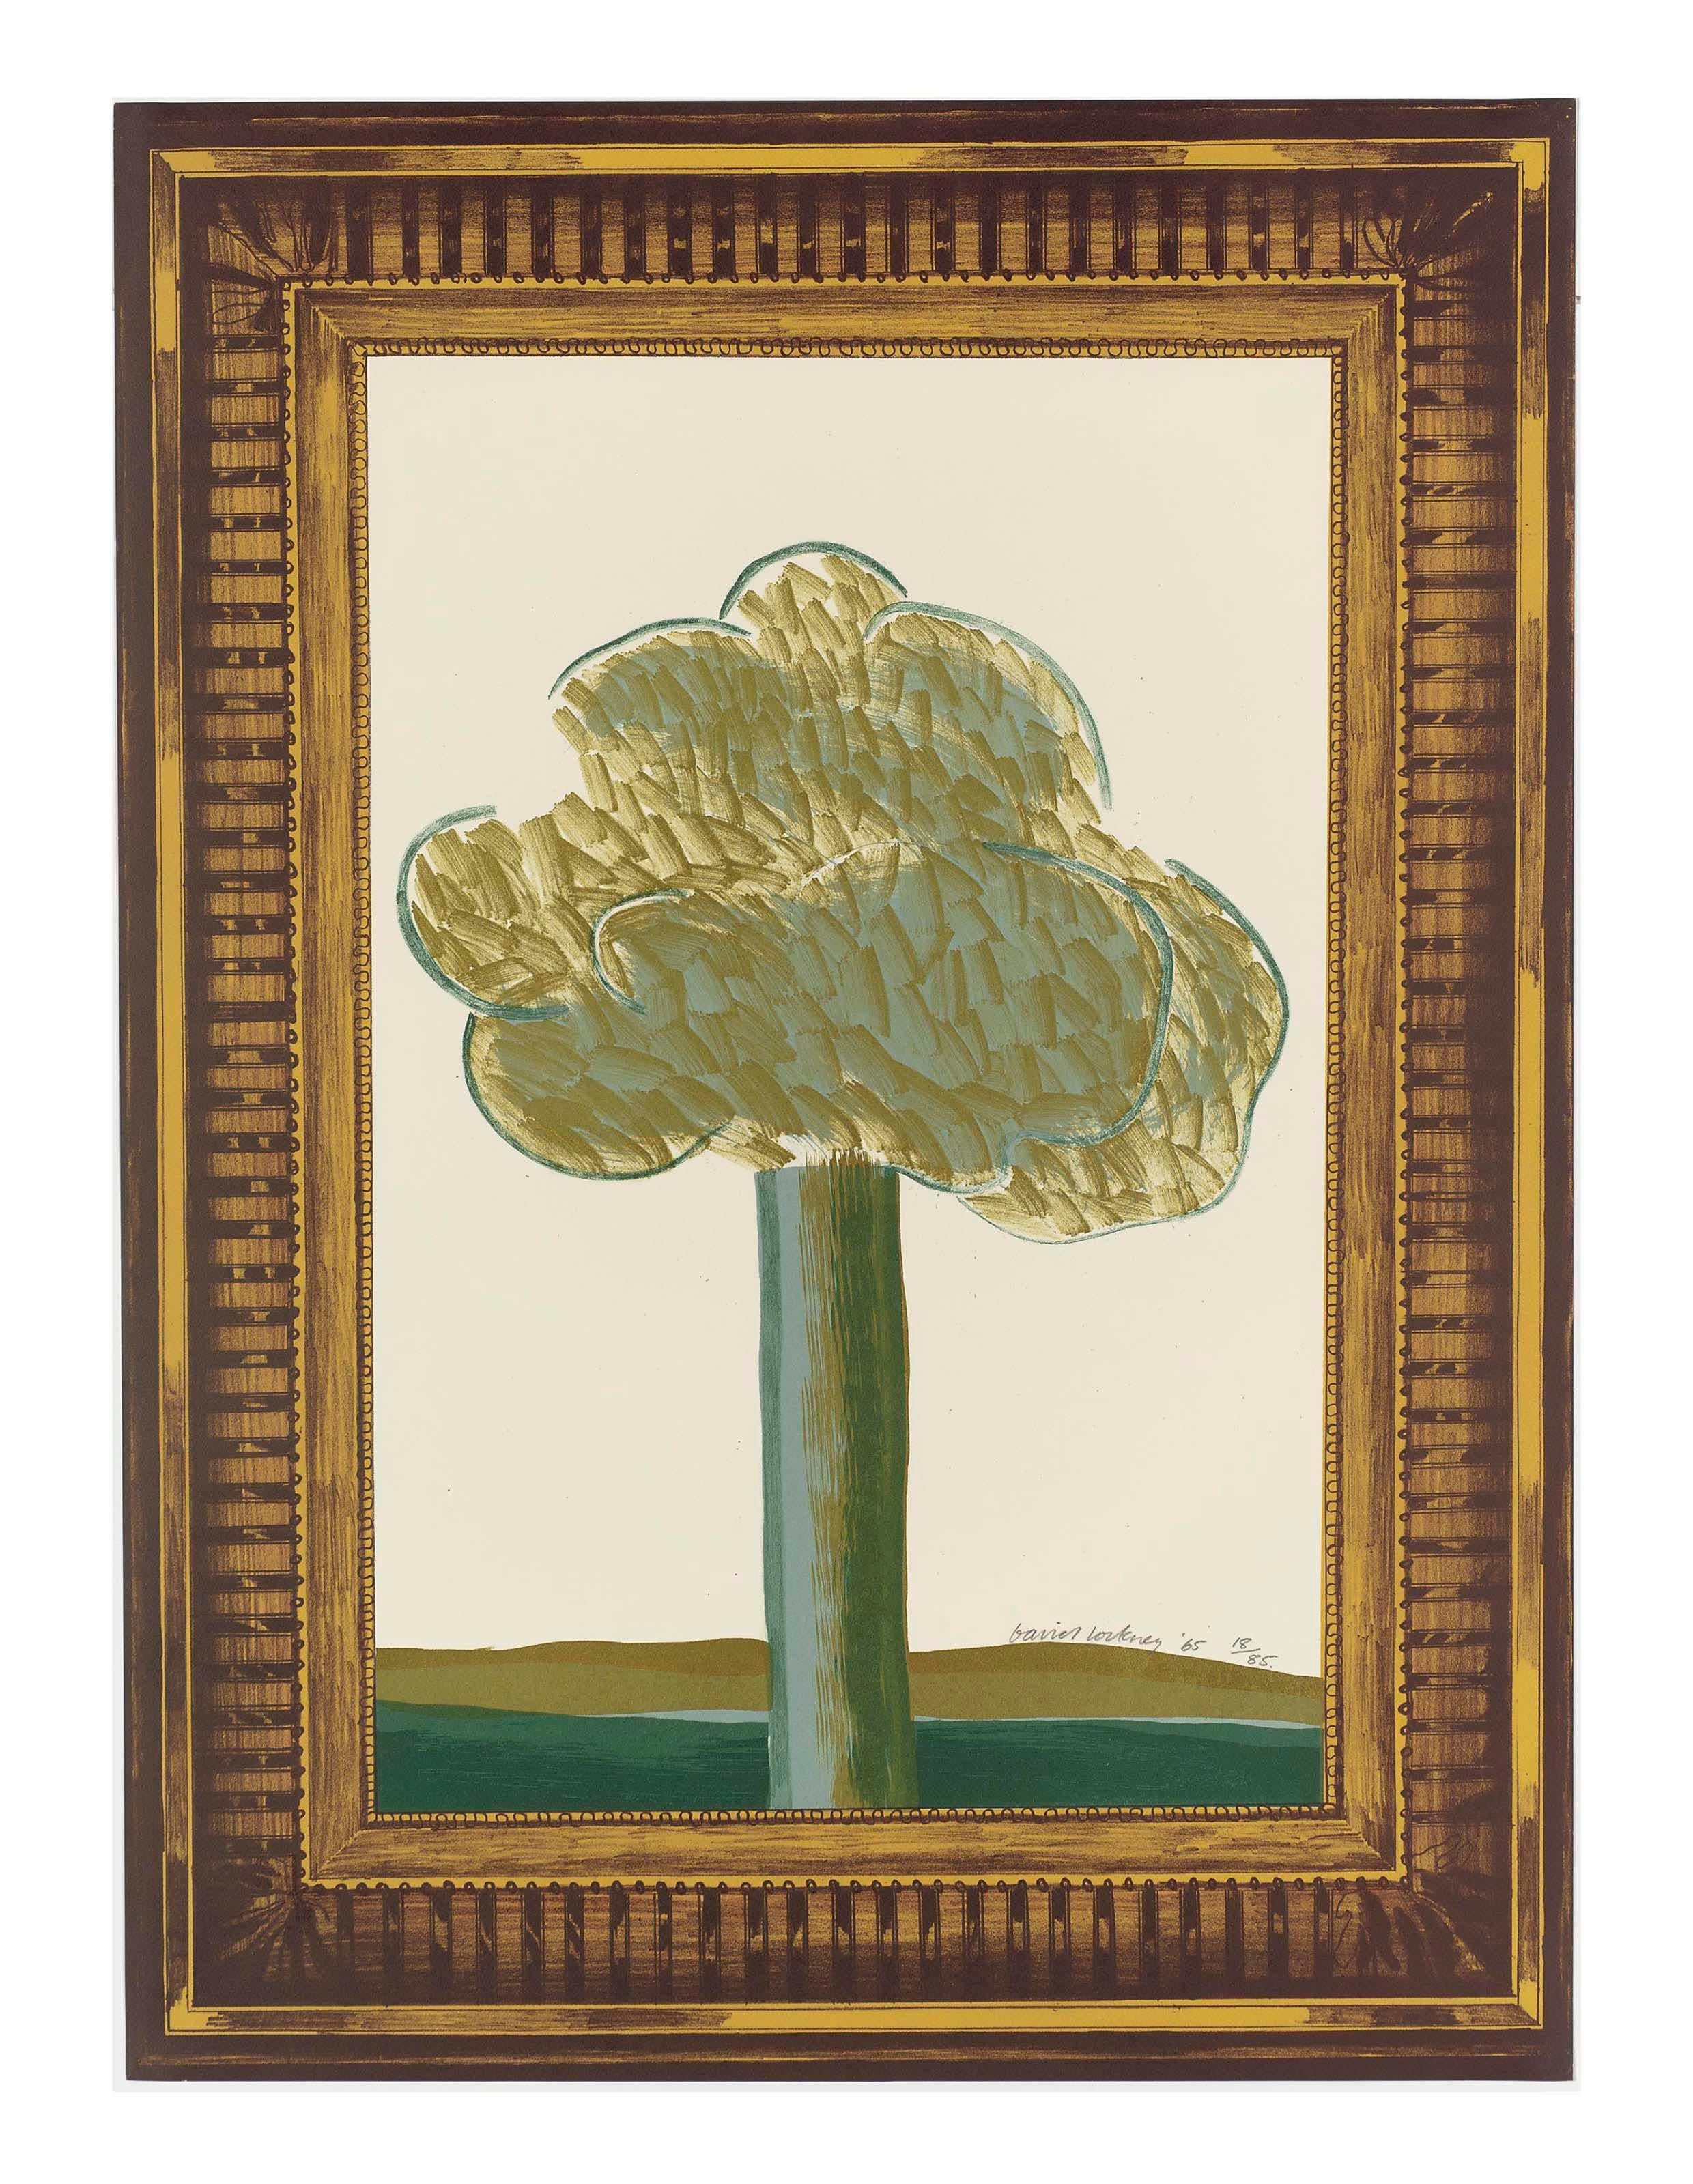 David Hockney Landscape Print - A Picture of a Landscape in an Elaborate Gold Frame -- Lithograph by Hockney